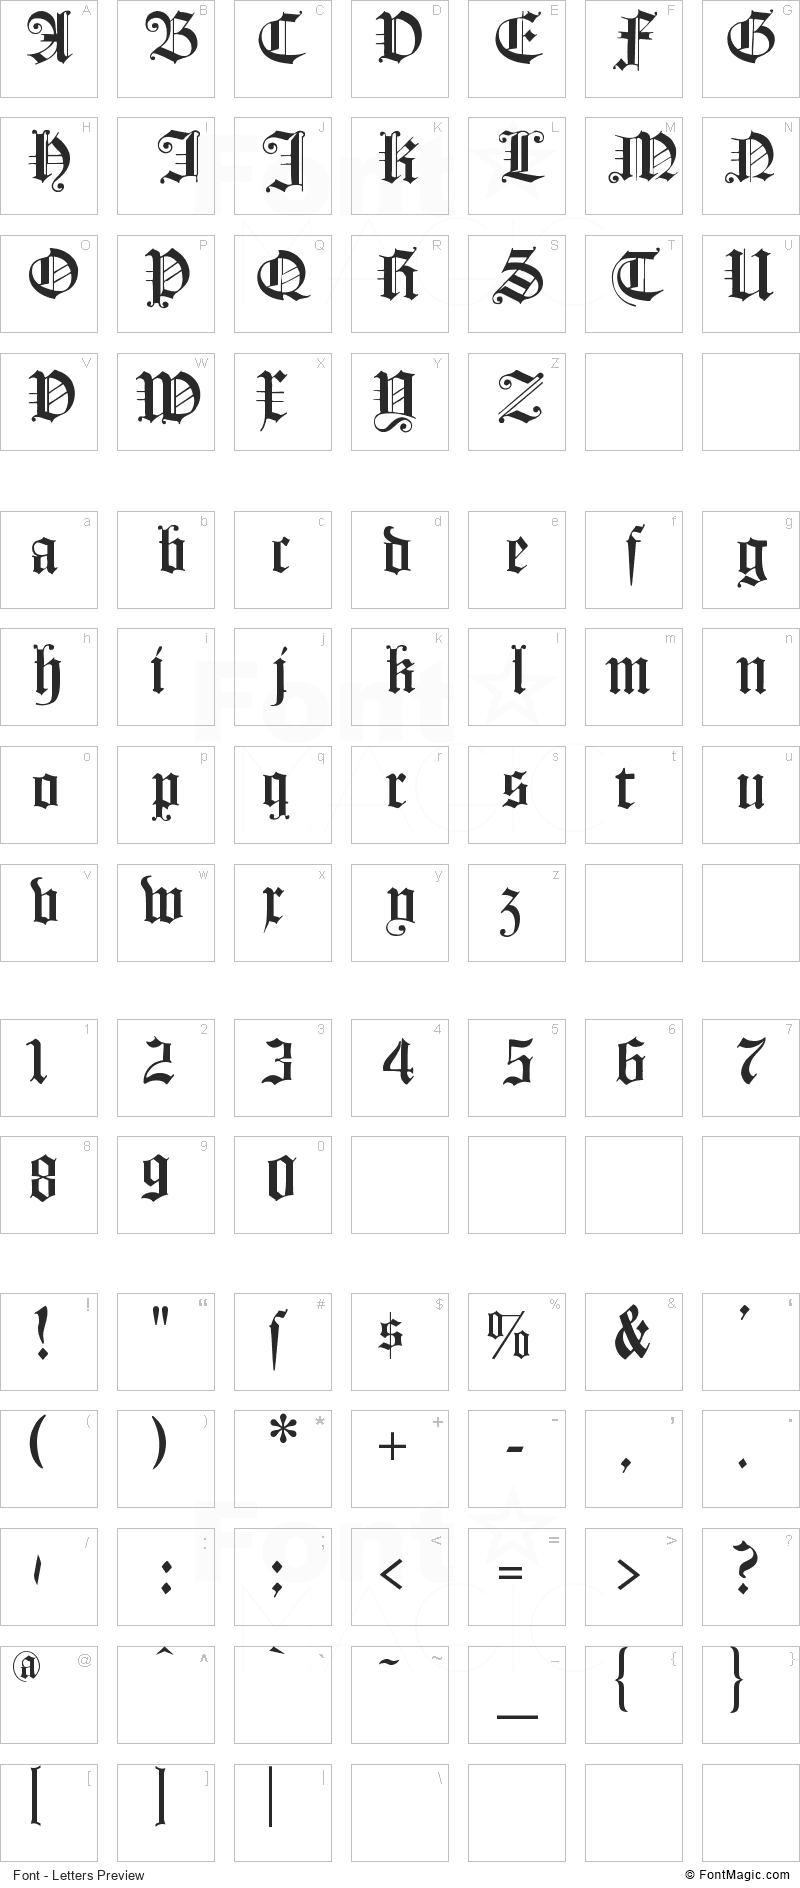 Flying Hollander Font - All Latters Preview Chart